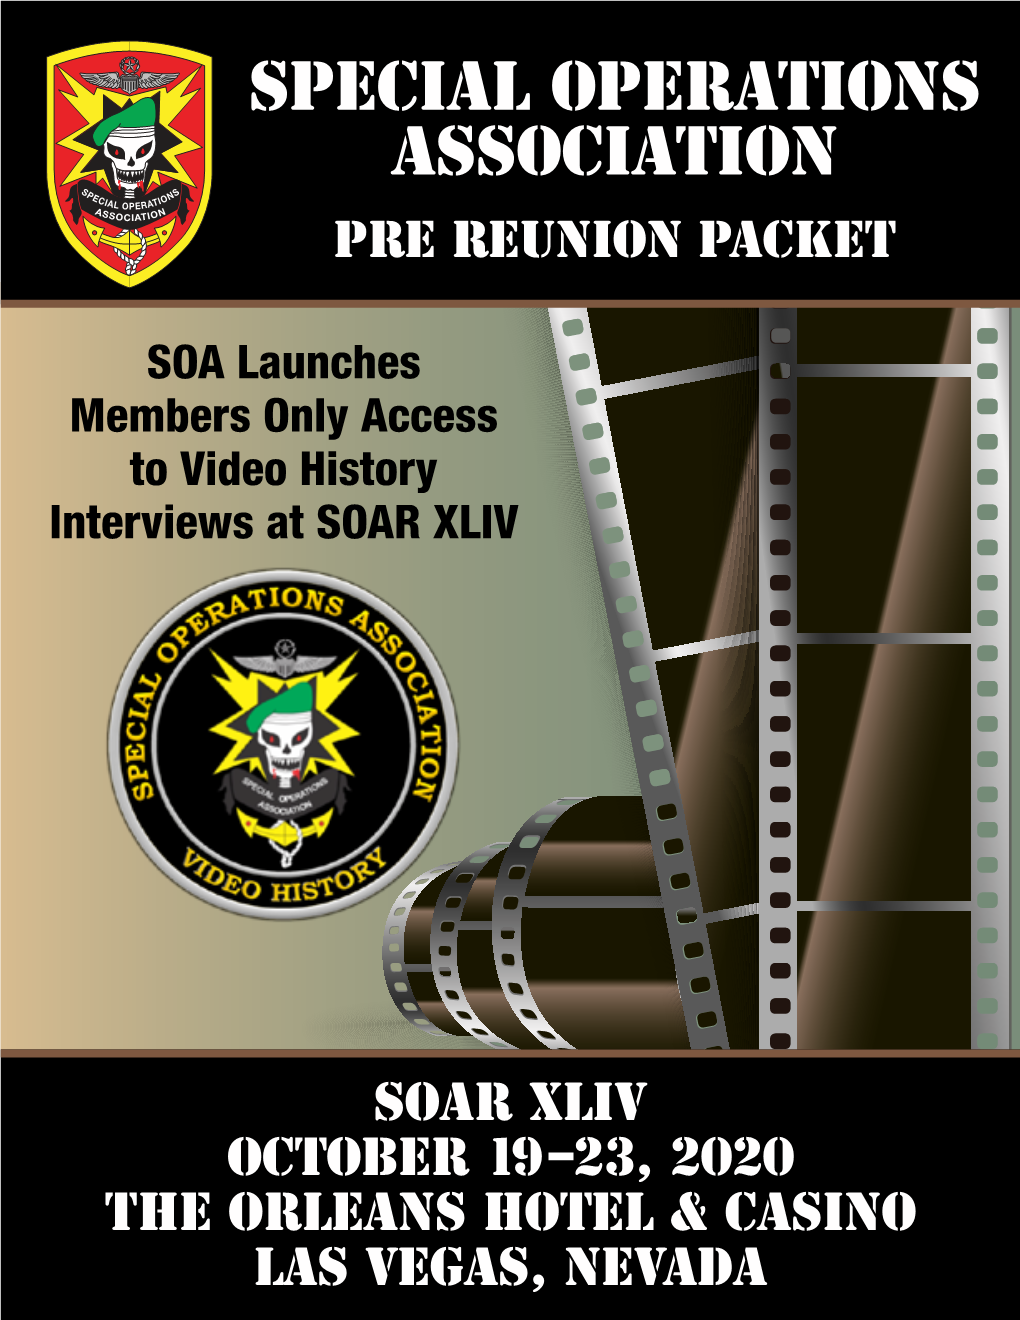 Special Operations Association PRE REUNION PACKET